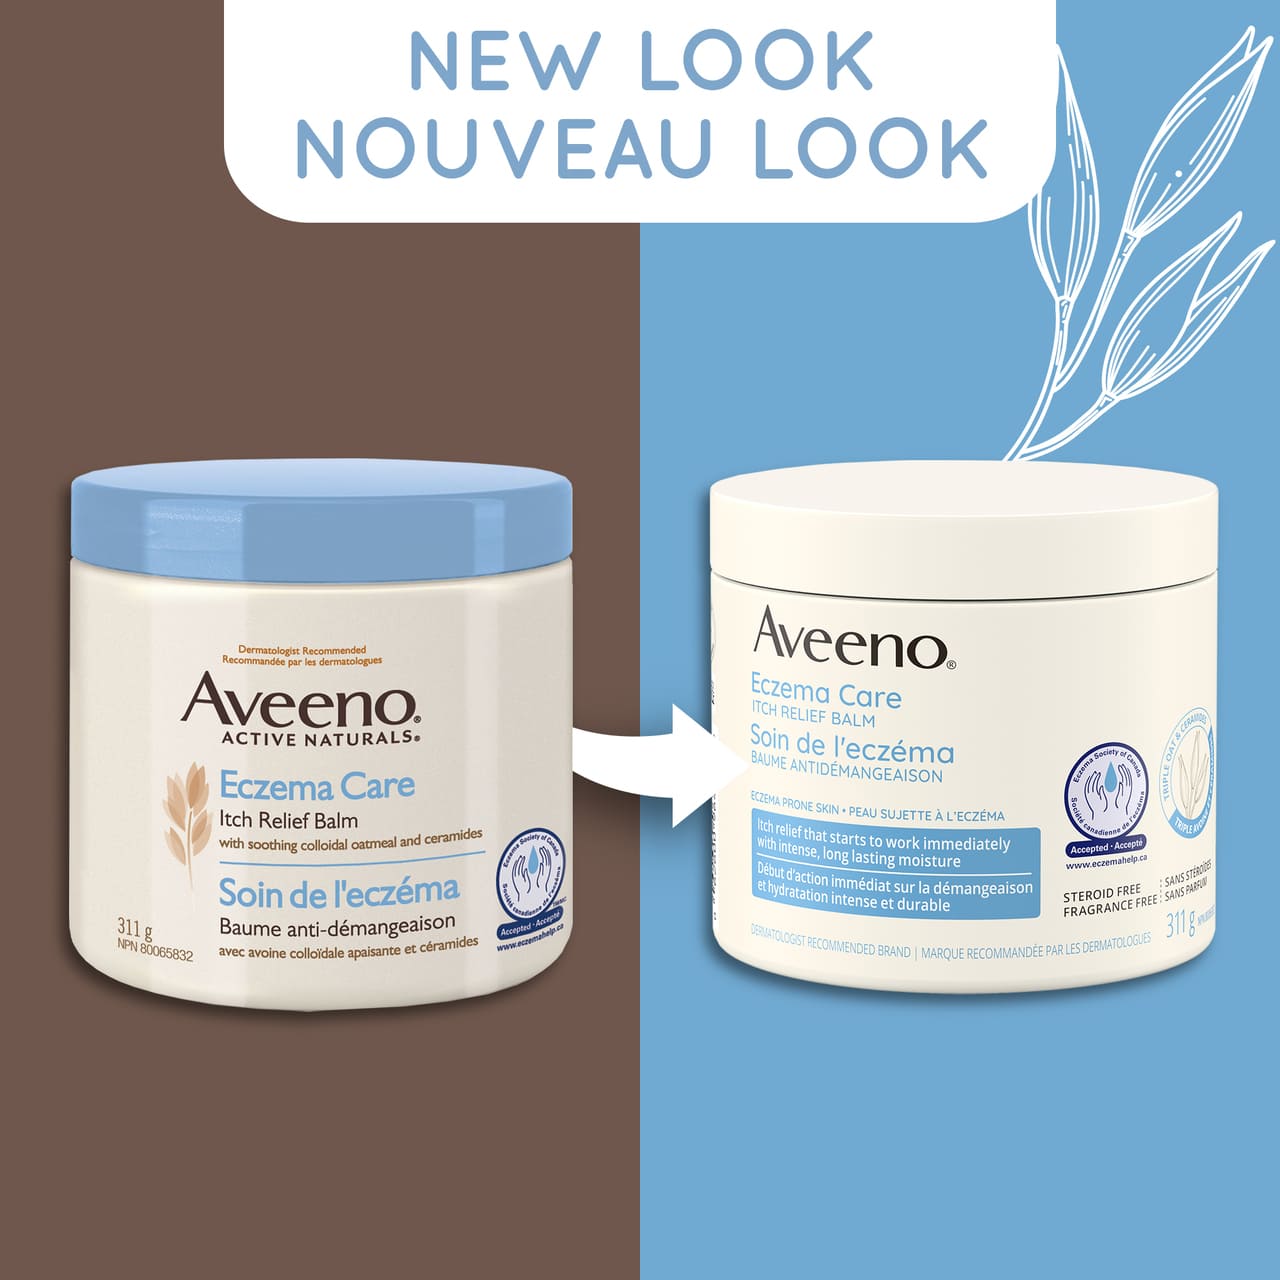 Old and new packaging of AVEENO® Eczema Care Itch Relief Balm, 311g jar, with text 'new look'